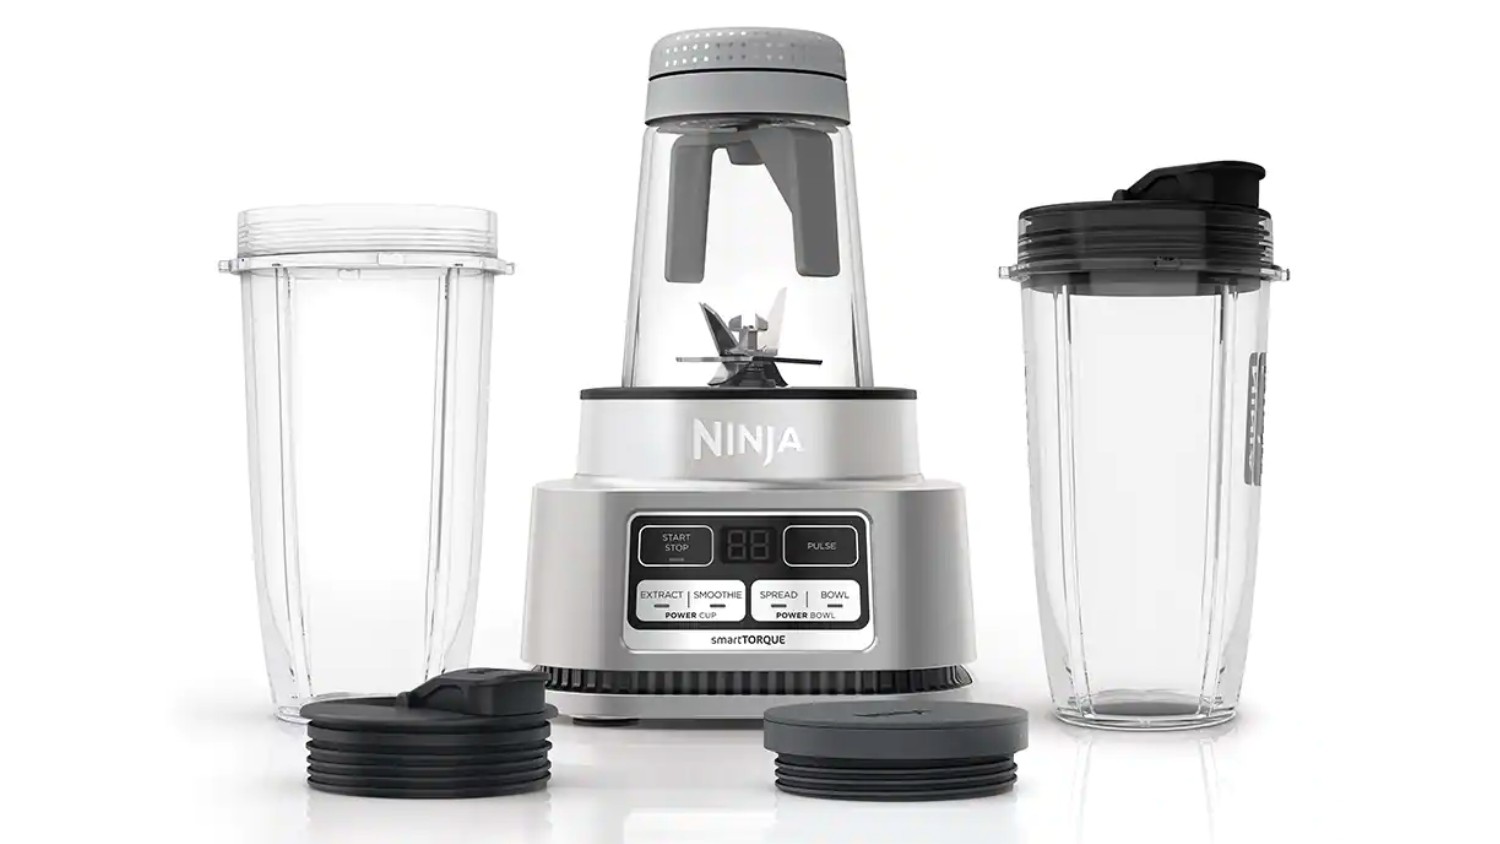 REVIEWING THE NINJA FOODI SMOOTHIE BOWL MAKER & NUTRIENT EXTRACTOR